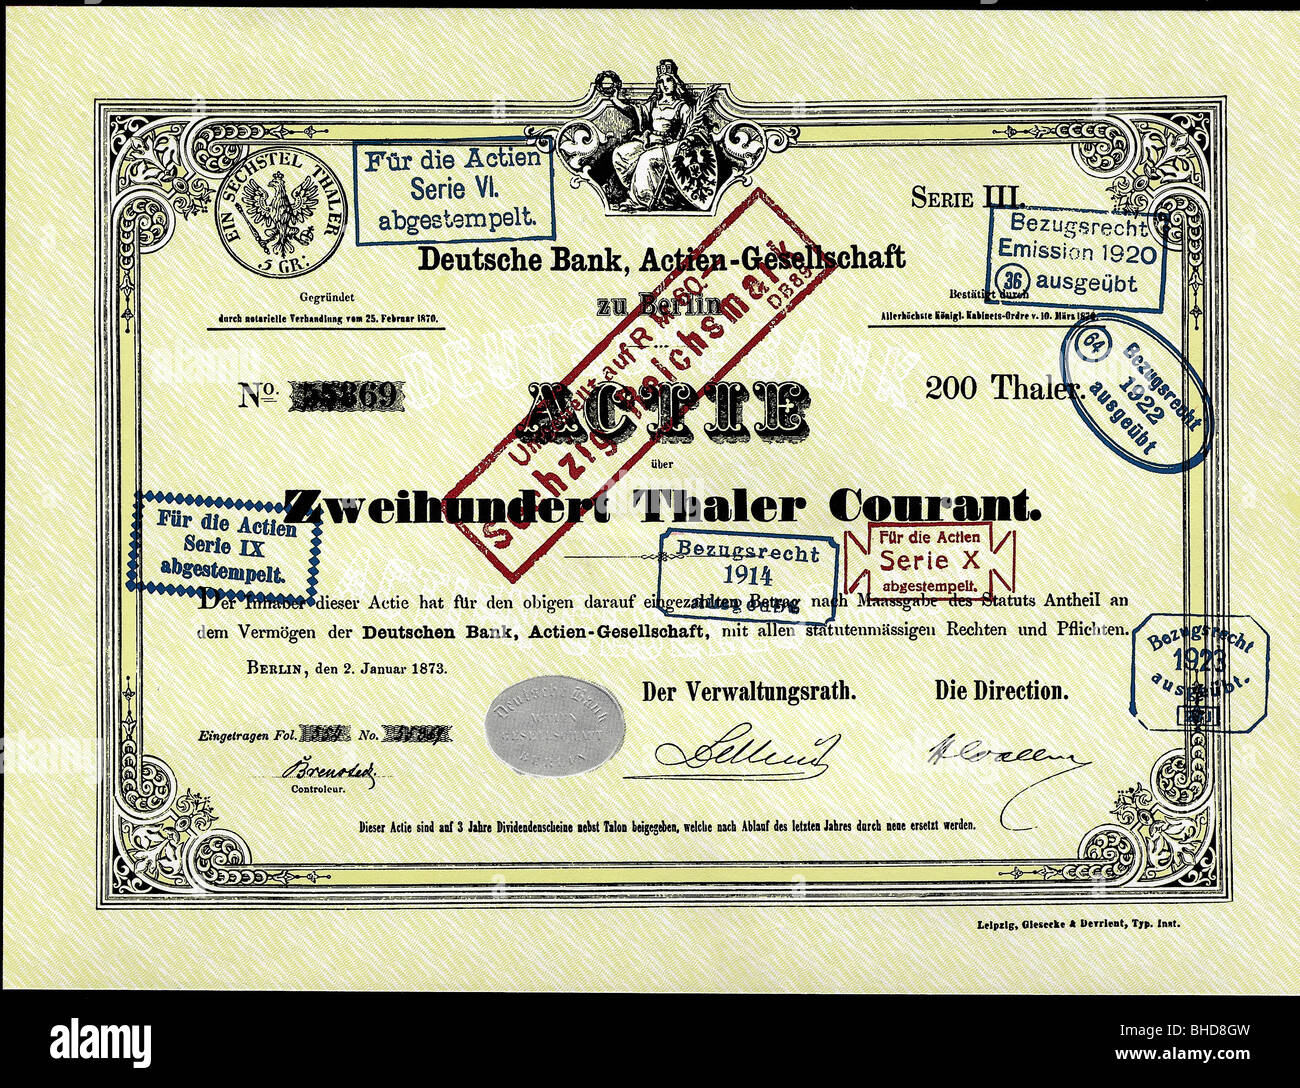 money / finance, stocks, stock of the German Bank about 200 Prussian Taler, Berlin, 1873, converted to 60 Reichsmark, historic, historical, thaler, thalers, reichsmark, Reichmark, currency reform, currency reforms, 1876, currency conversion, 19th century, Stock Photo